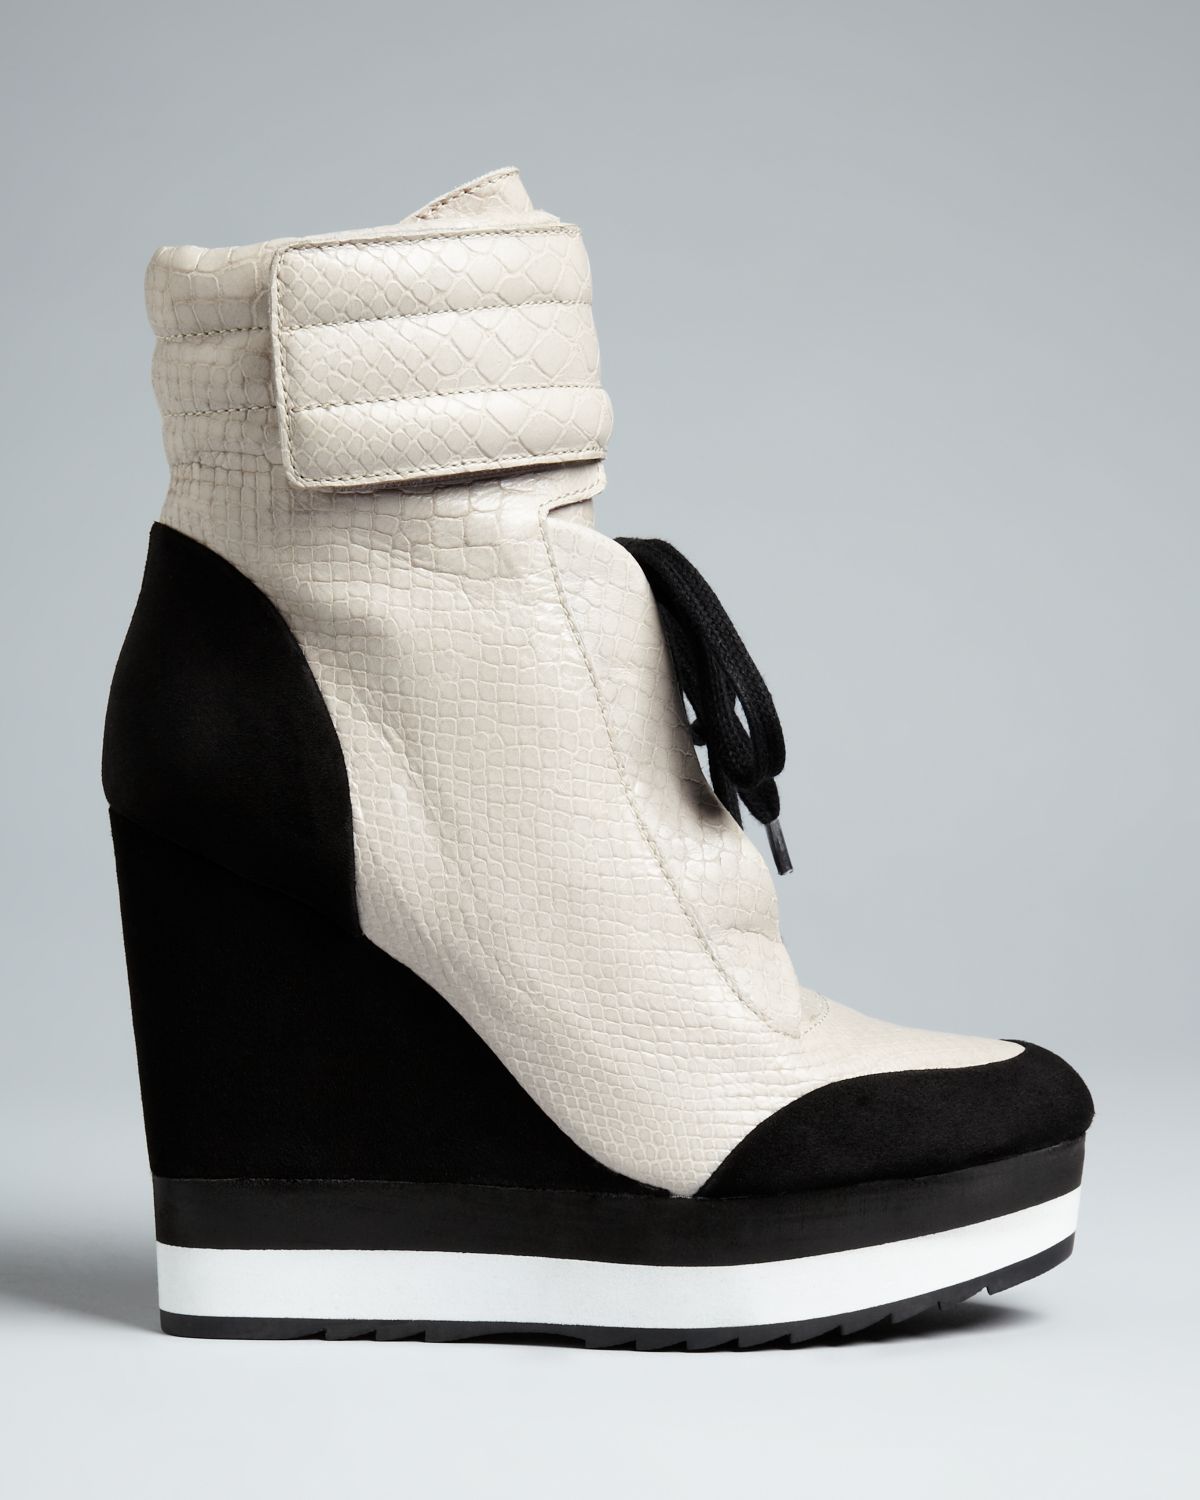 Boutique 9 High Top Wedge Sneaker Booties Whispers in Ice Grey/Black  (Black) - Lyst